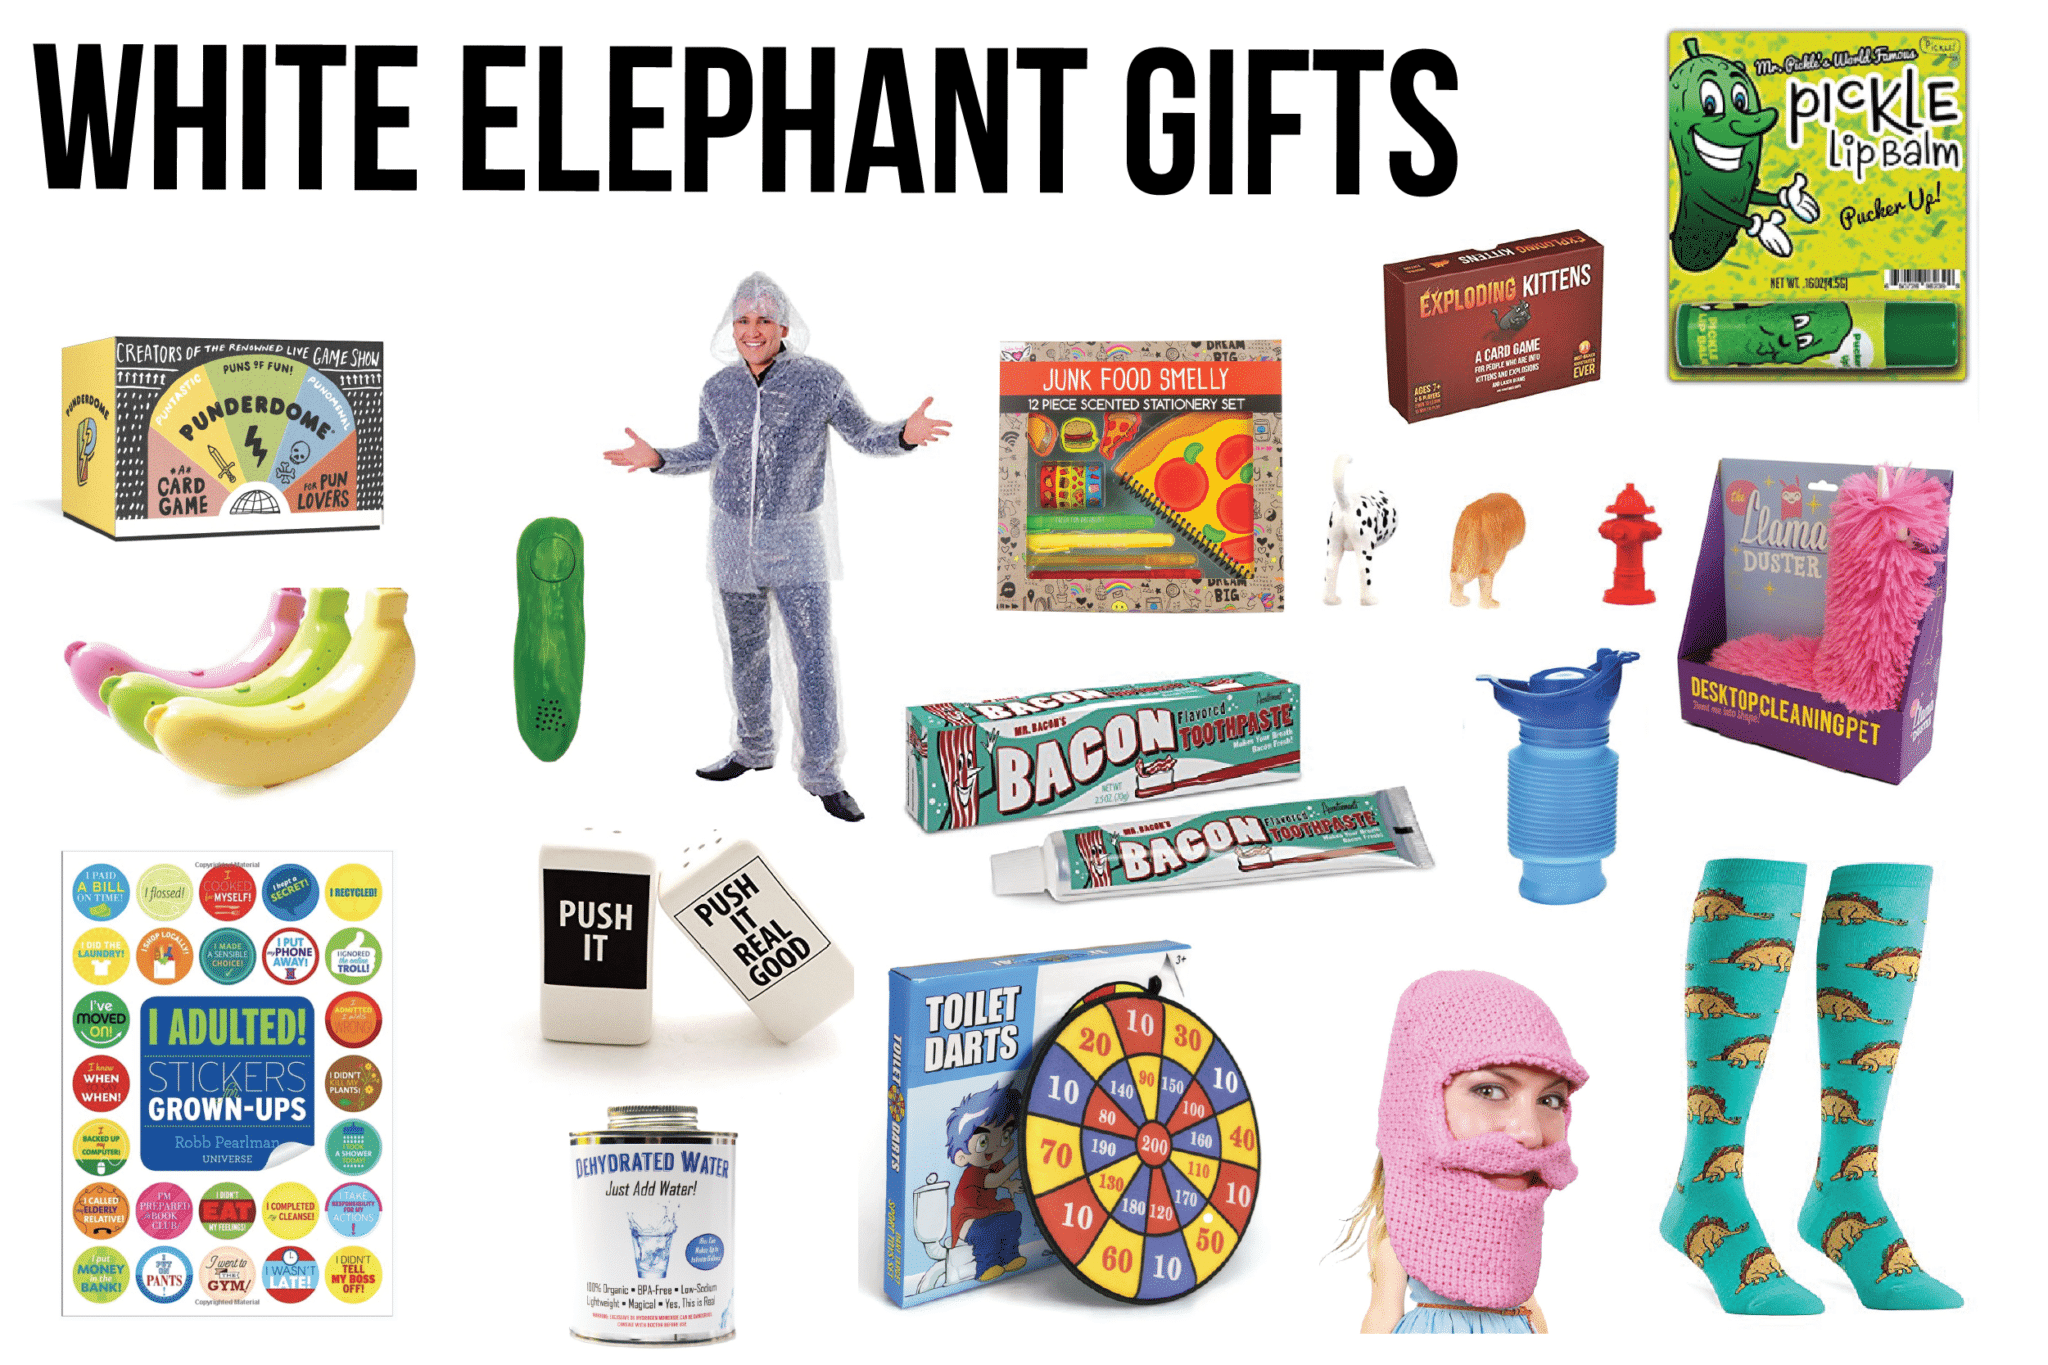 https://www.playpartyplan.com/wp-content/uploads/2015/11/WHITE-ELEPHANT-GIFTS-01.png